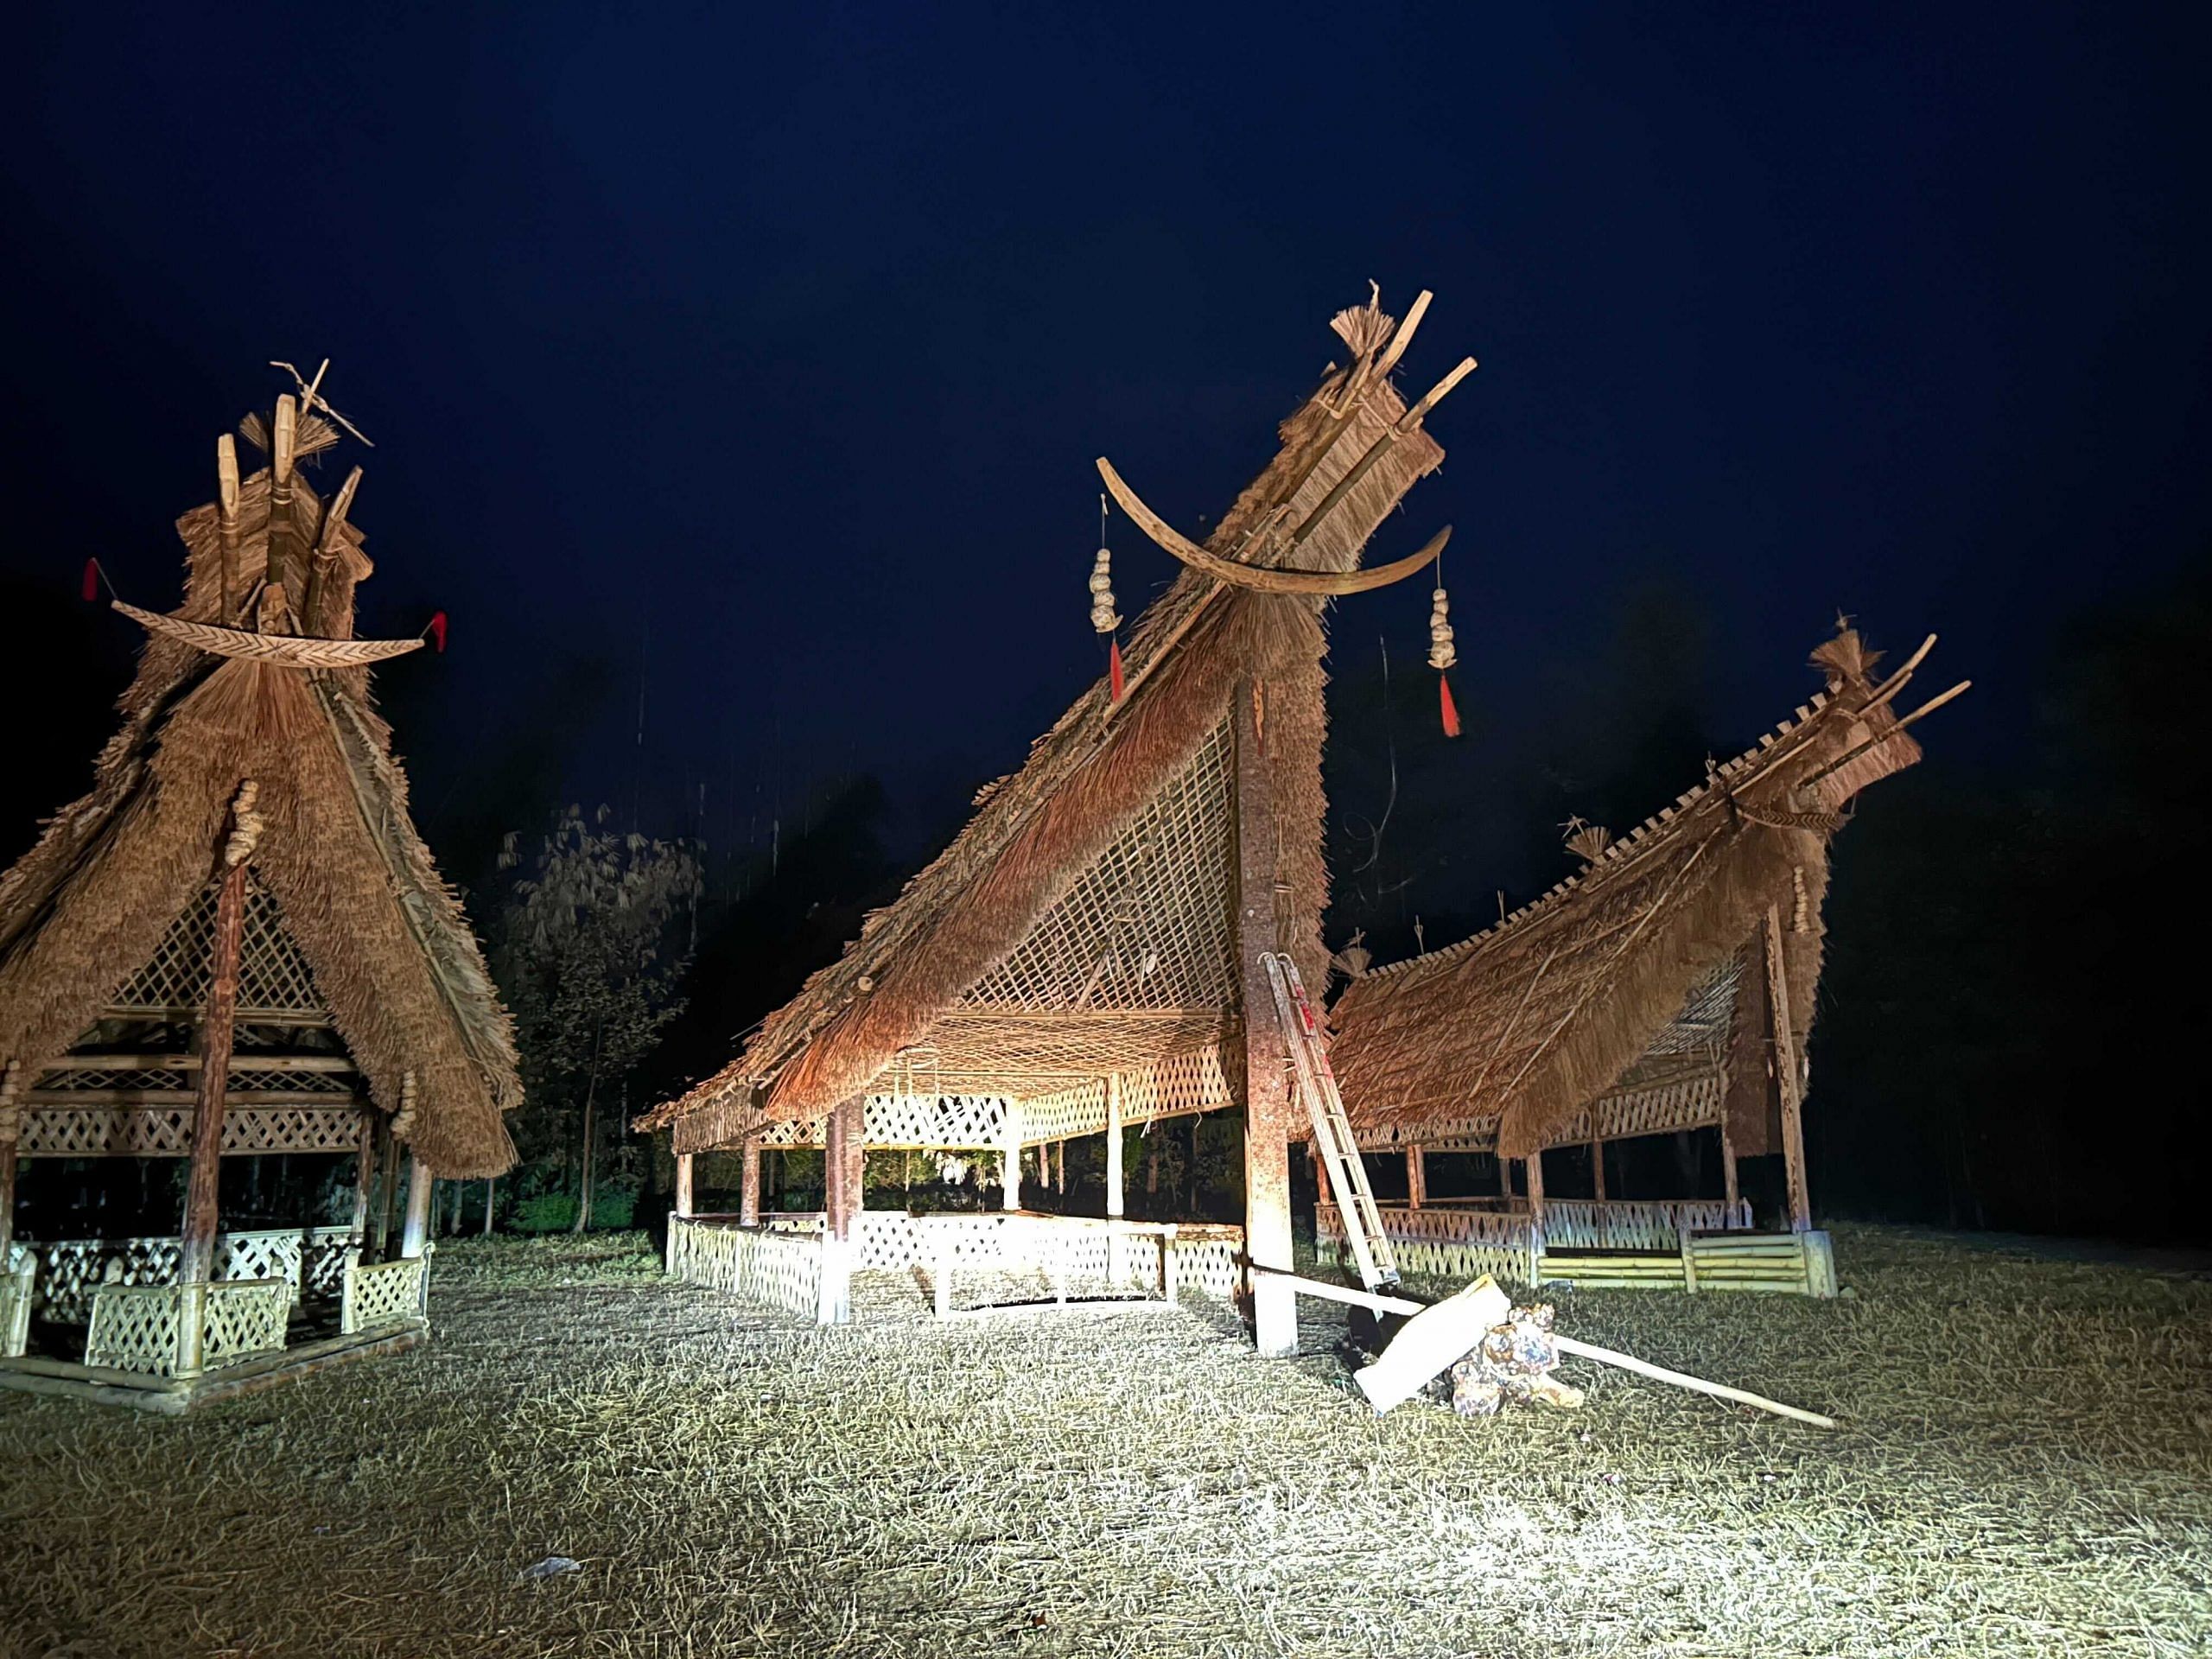 Traditional Naga dormitory-like cottages or Morungs built in Tuensang as part of Better Life Foundation’s cultural preservation project | Photo: Disha Verma | ThePrint